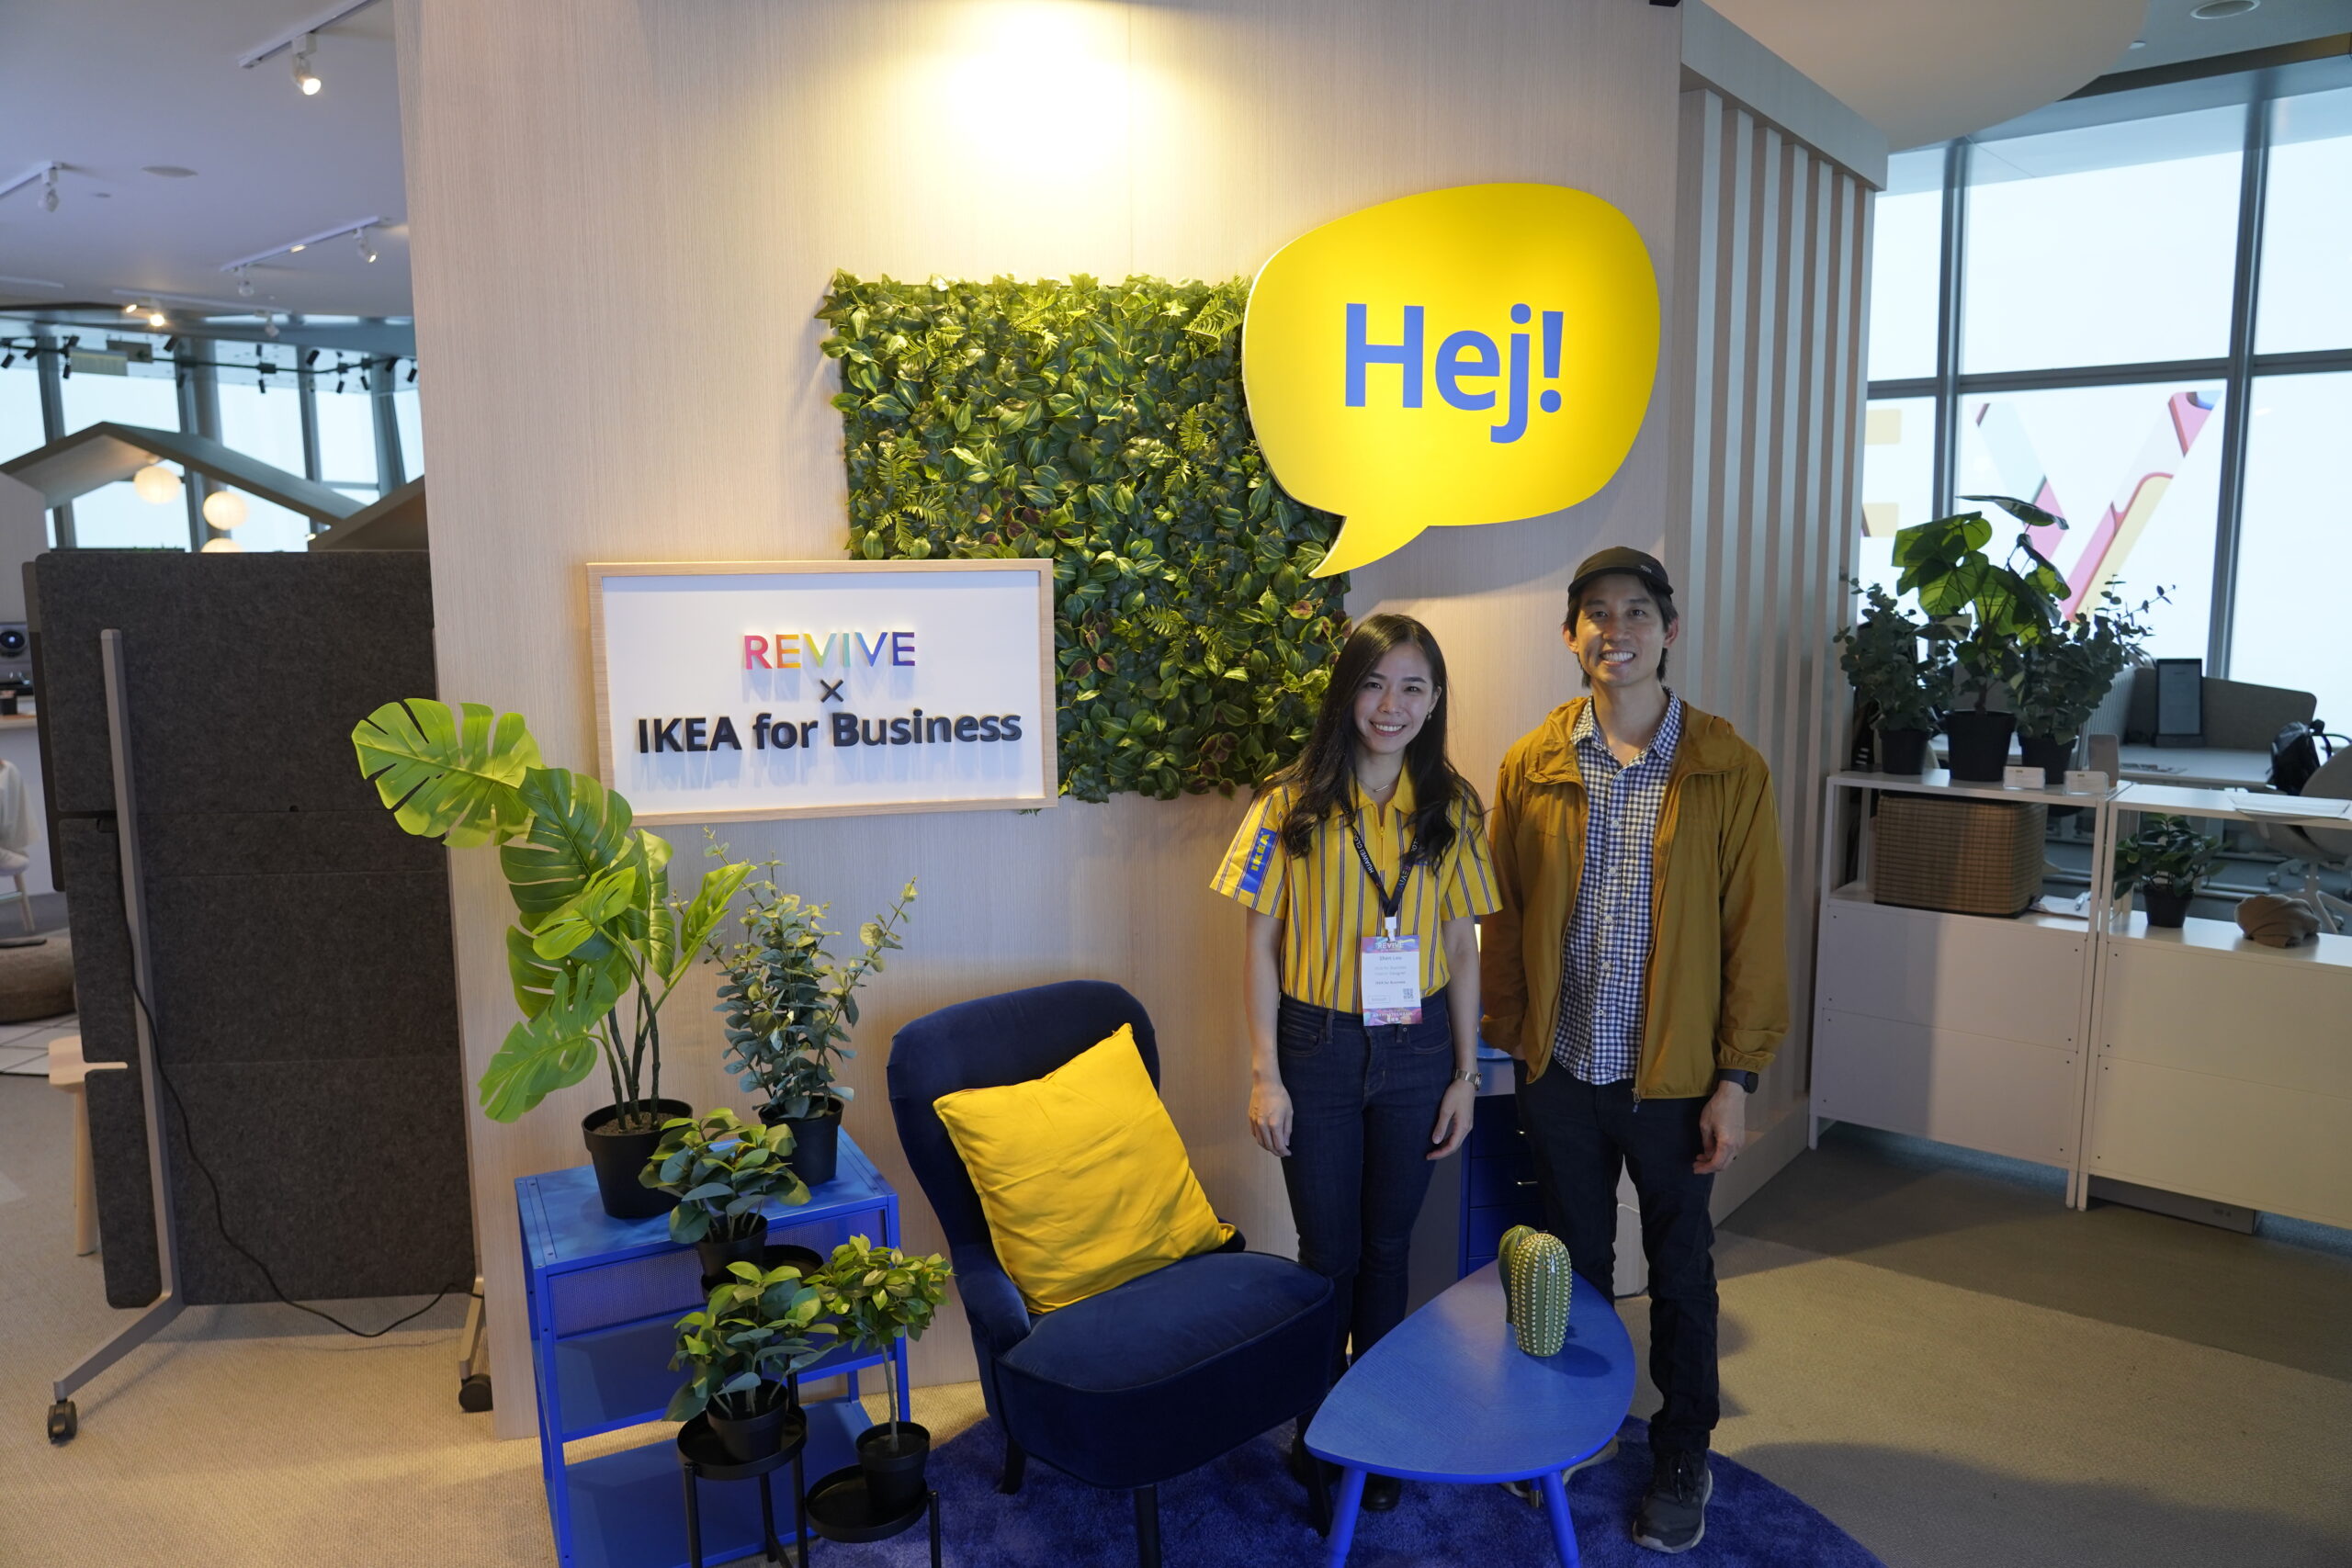 Two individuals standing in front of a promotional display for REViVE IKEA for Business, featuring a living wall, furniture, and a large speech bubble with the word "Hej!"





